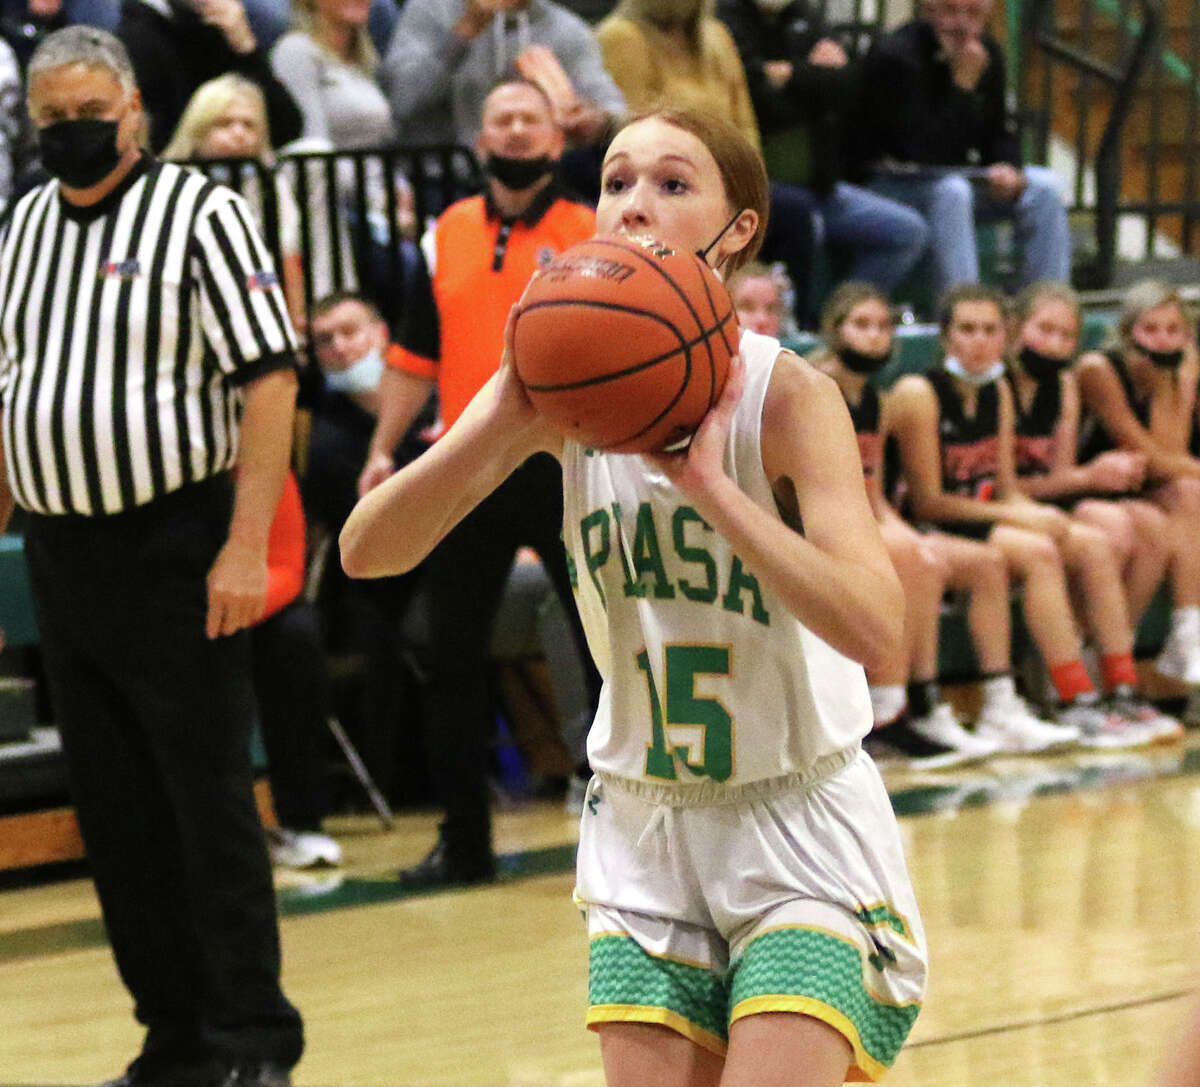 Southwestern's Hannah Nixon, shown lining up a 3 earlier in the season, scored 16 points with four 3-pointers in Monday's Birds' loss to North Mac in Piasa.